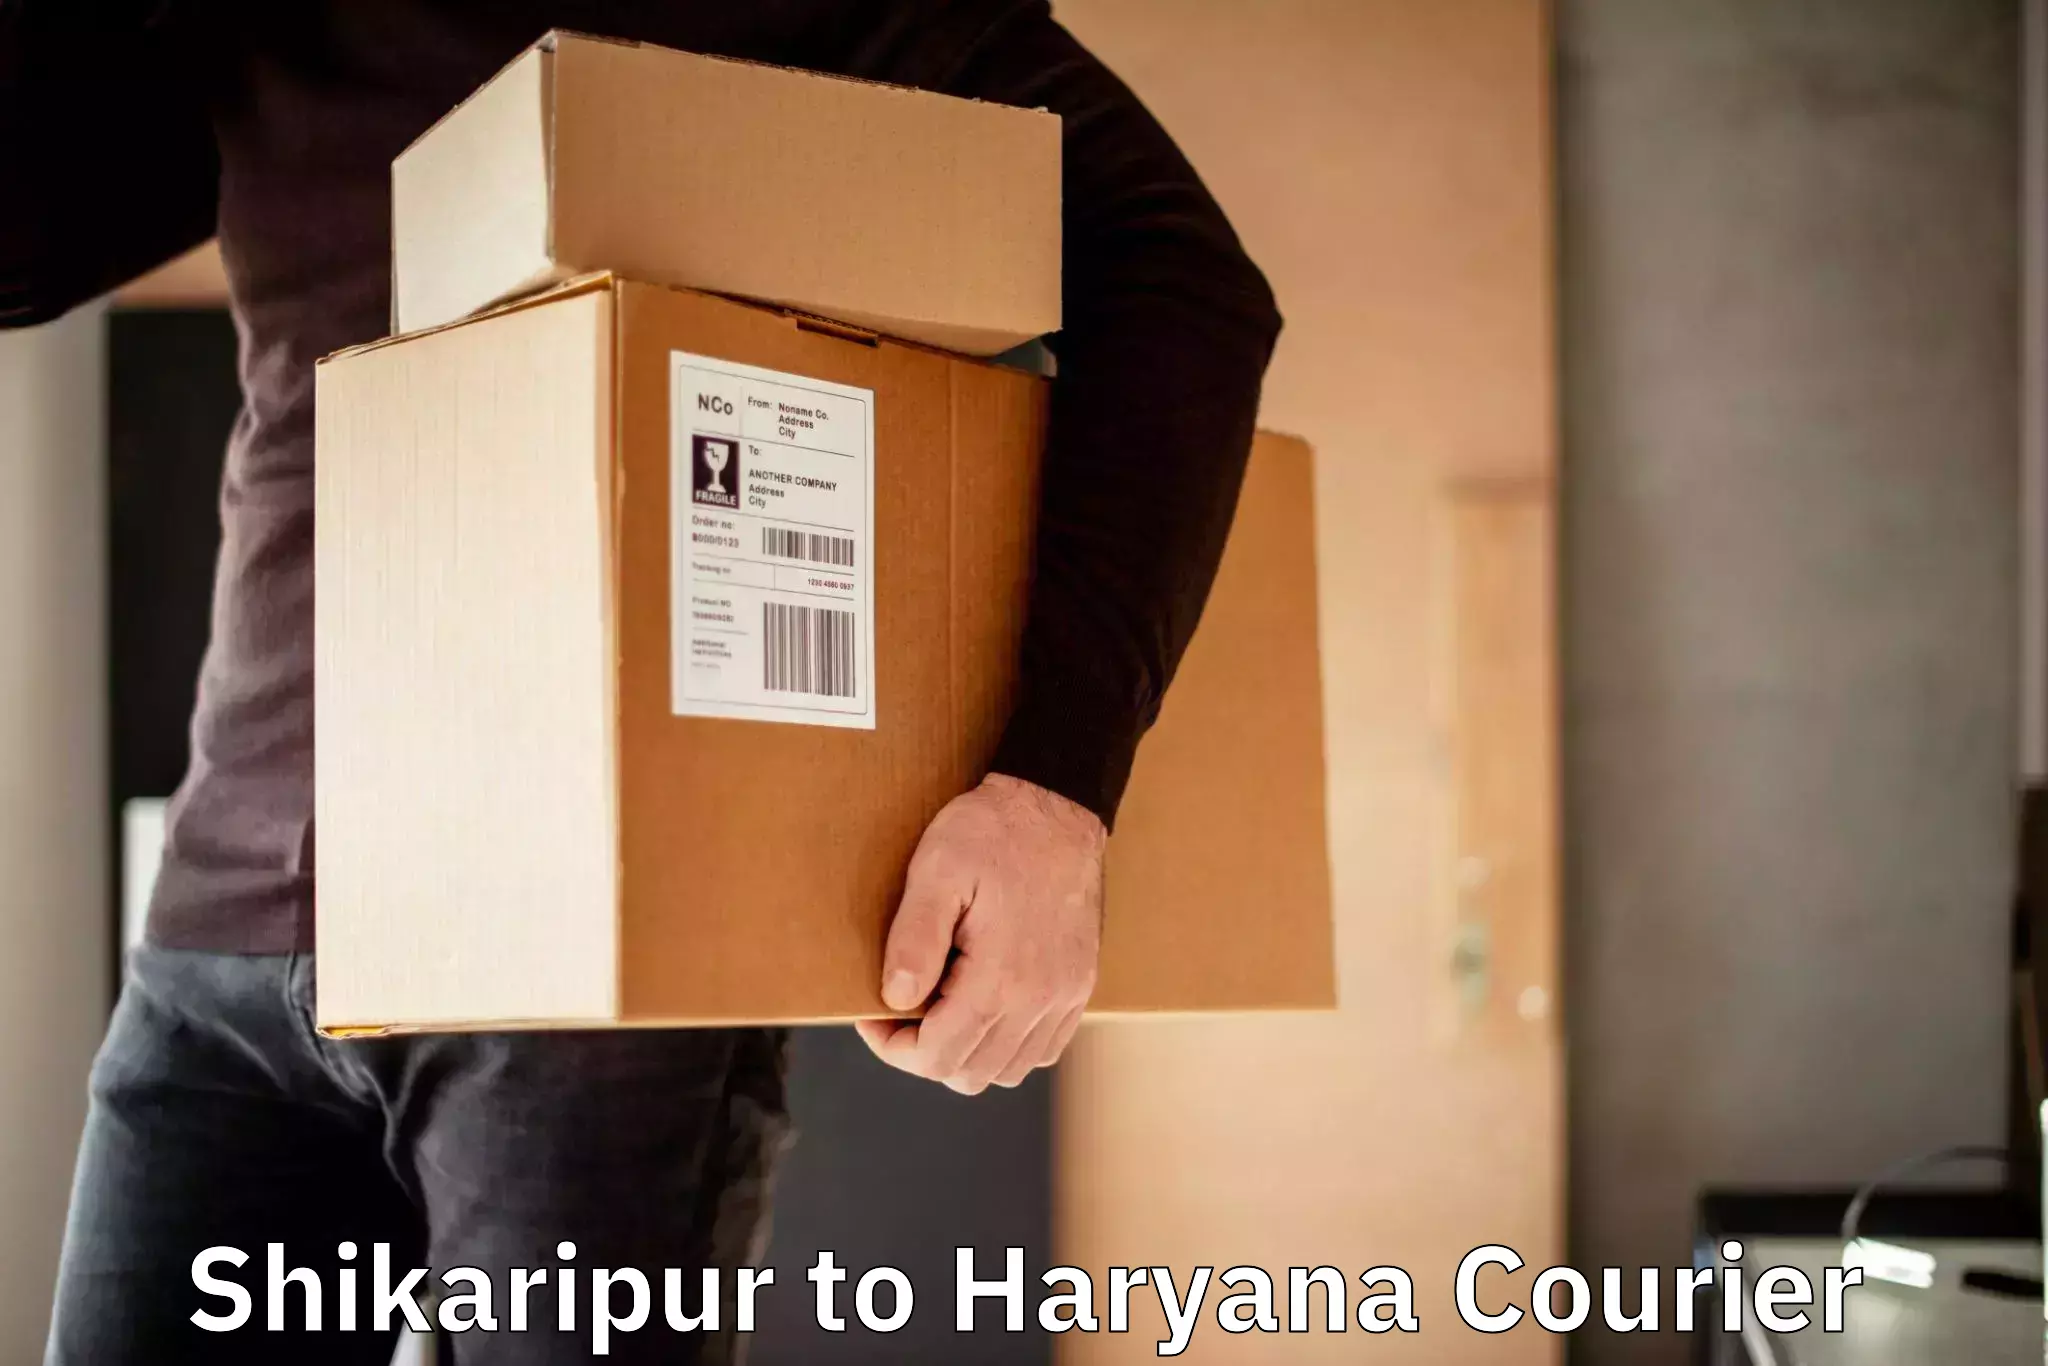 Courier service comparison Shikaripur to Odhan